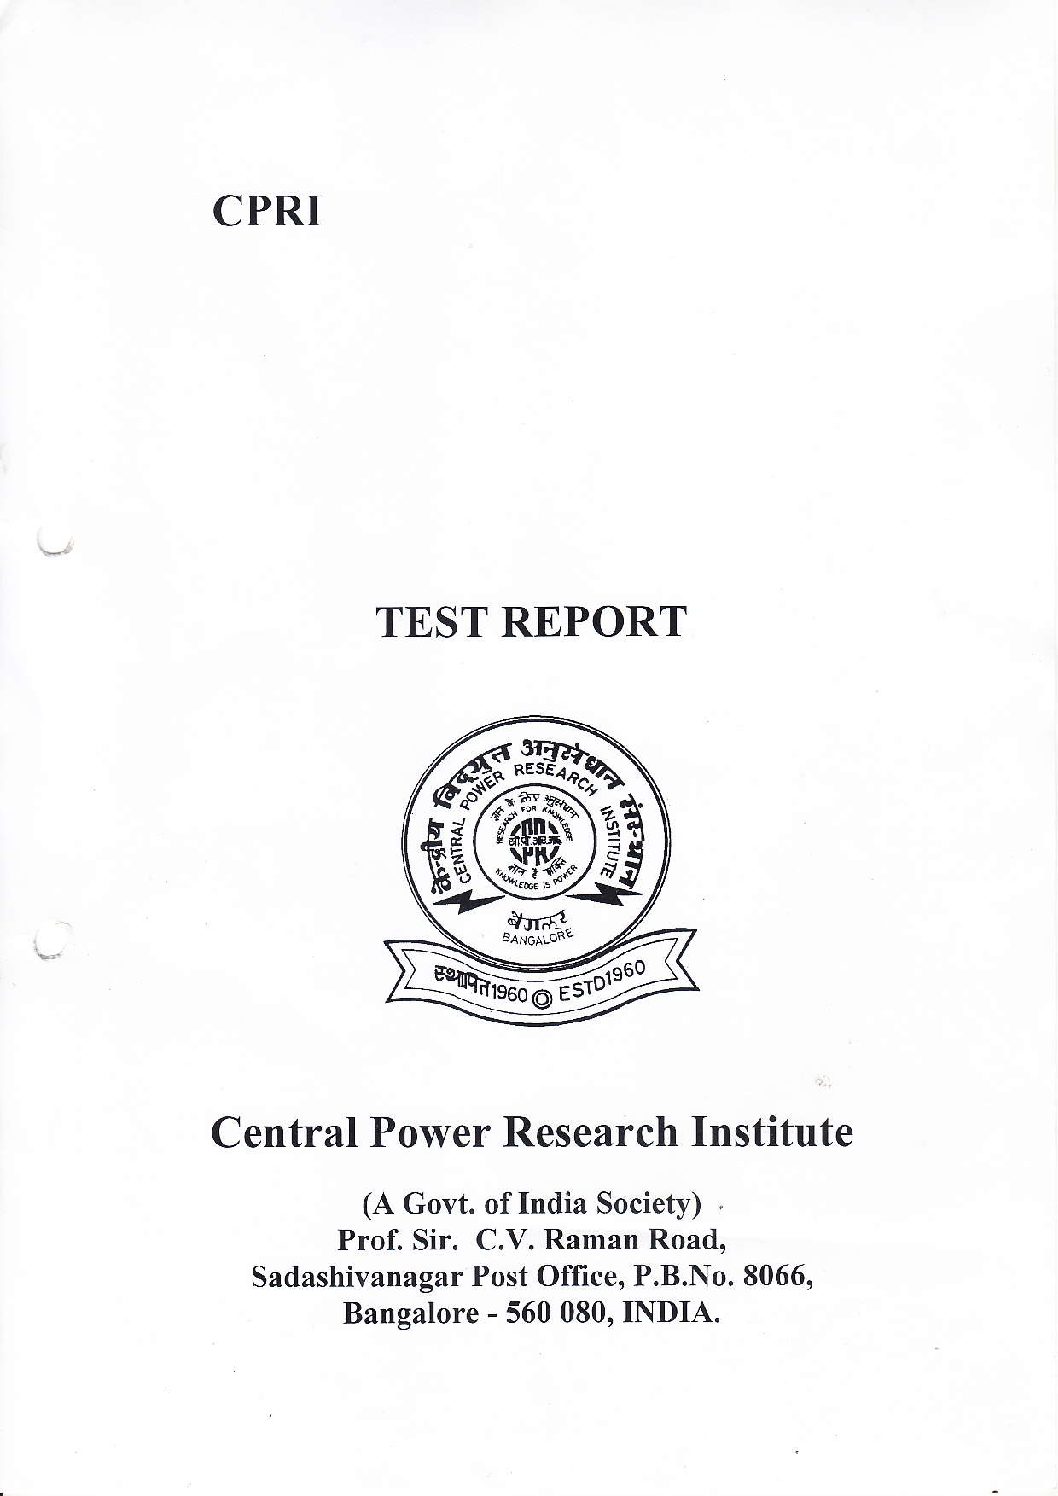 Central Power research Institute